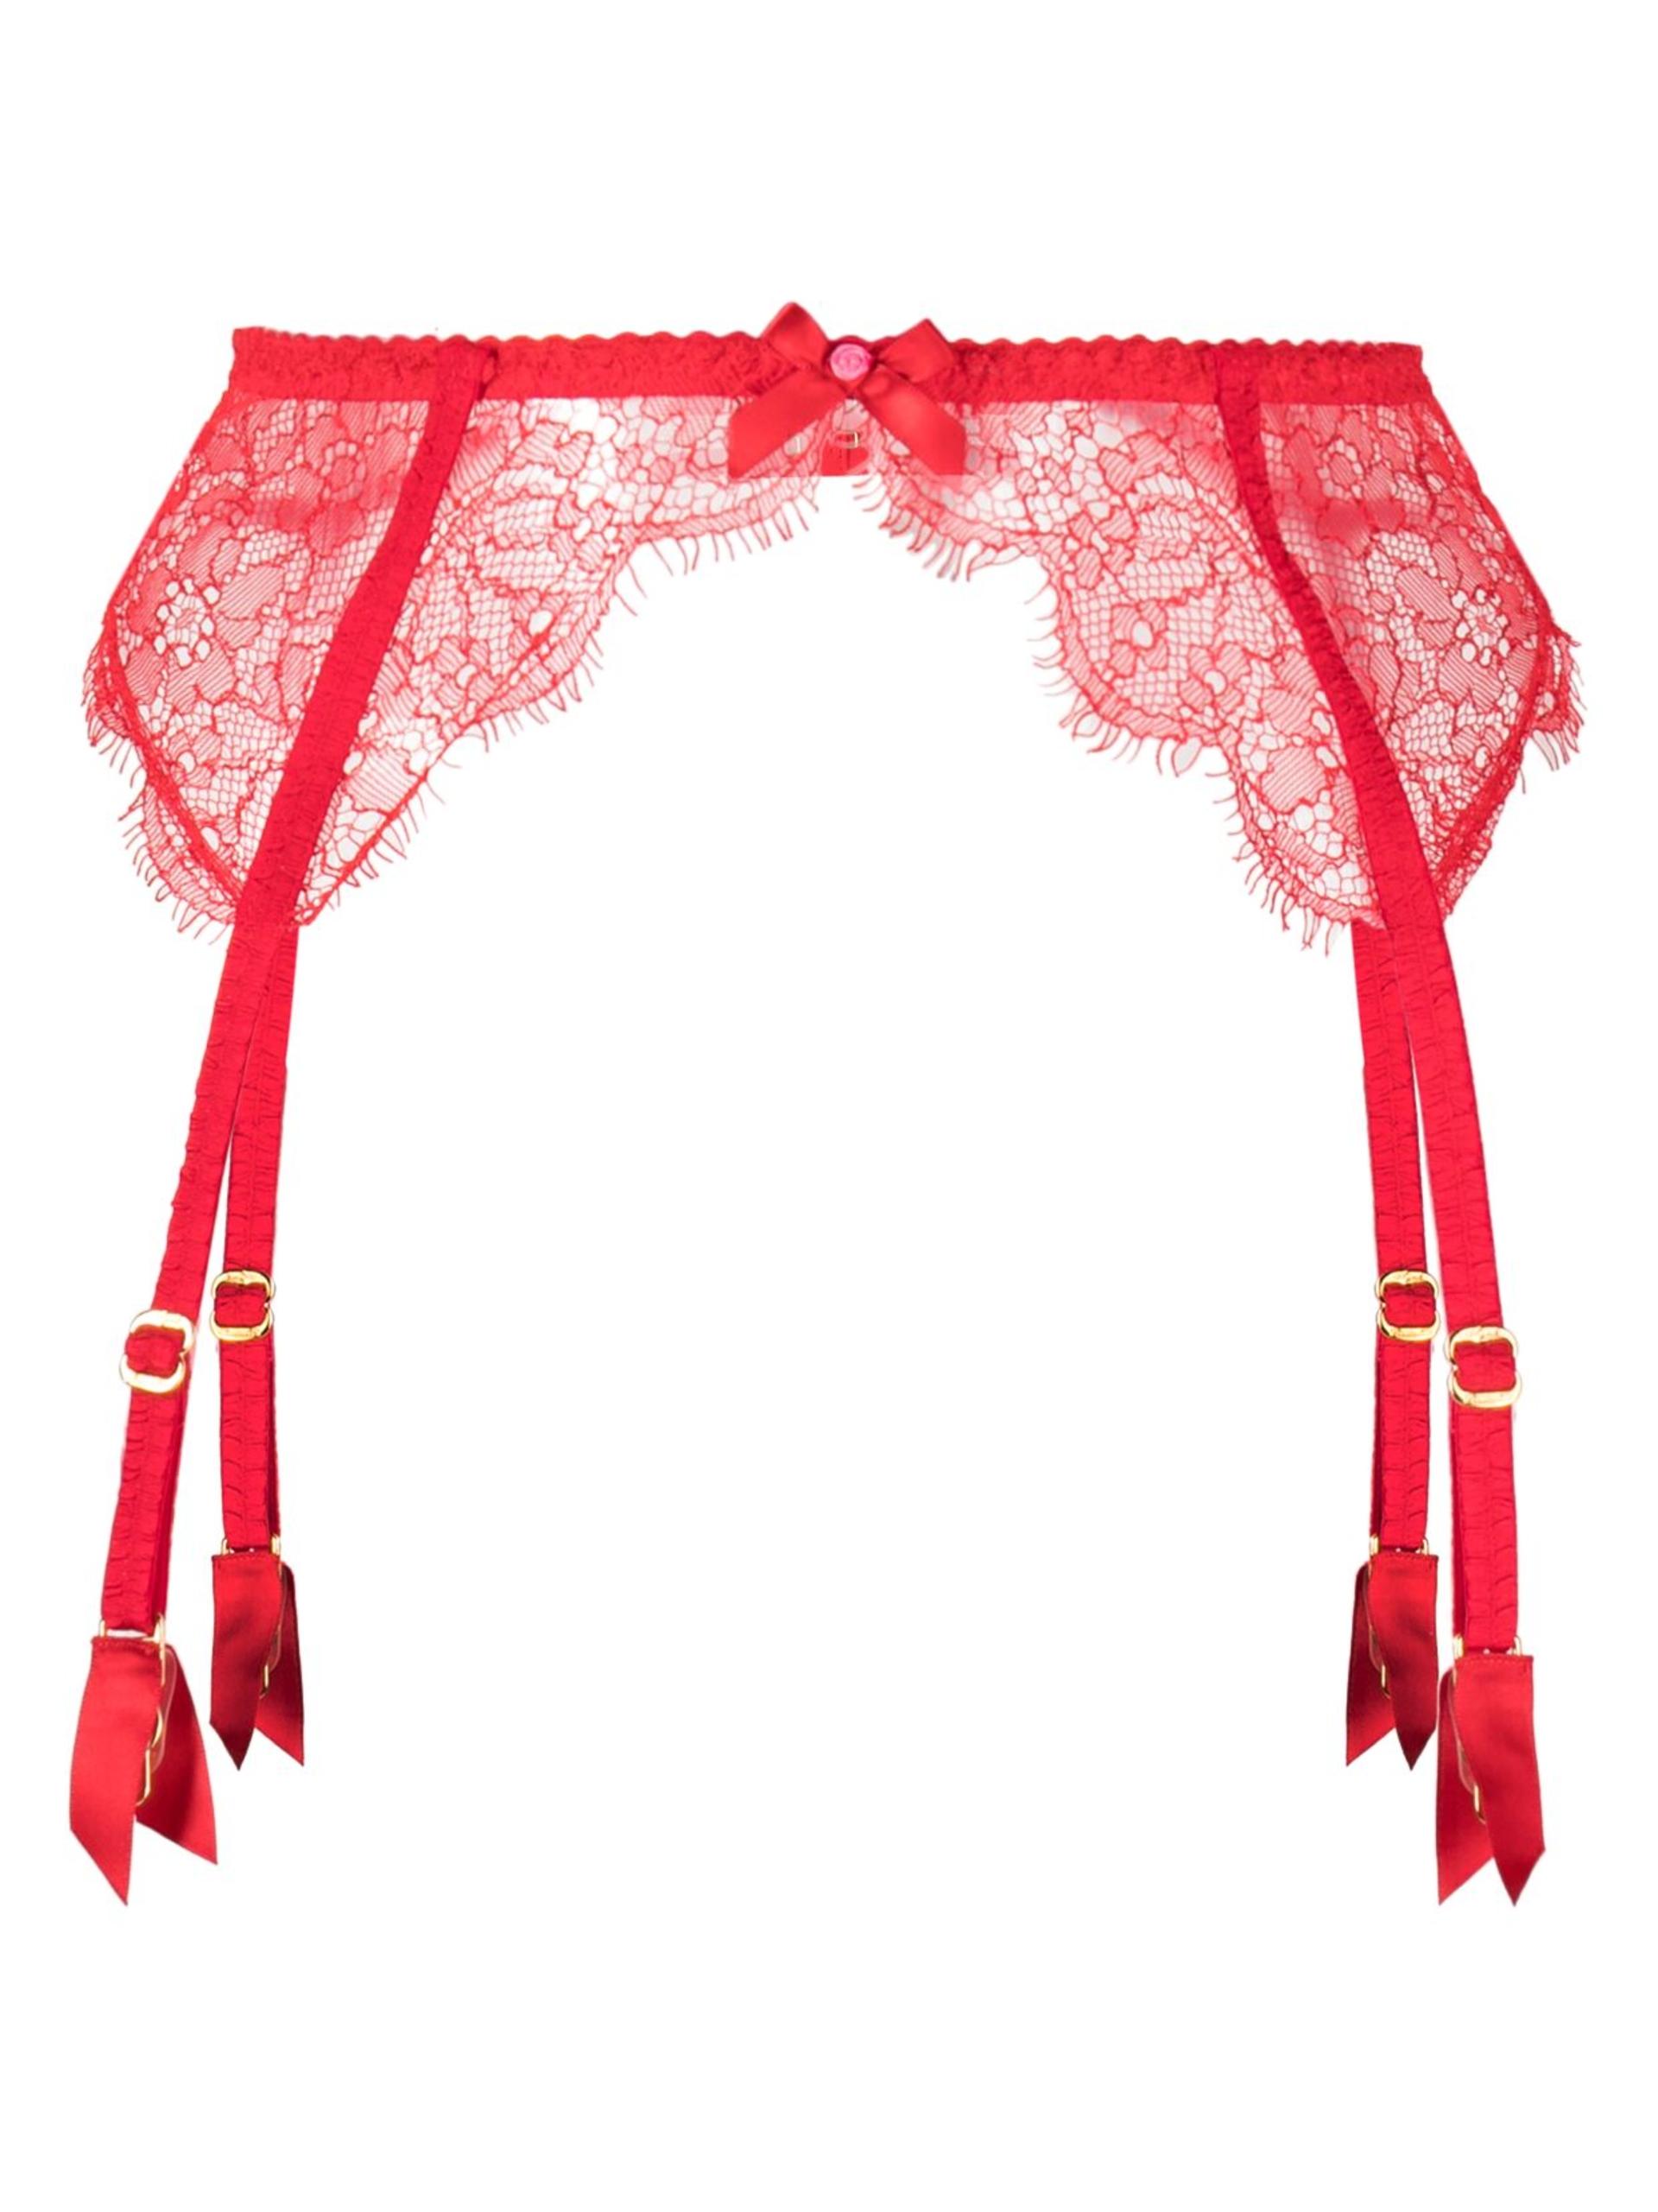 Agent Provocateur Lorna Lace Suspenders in Red | Lyst